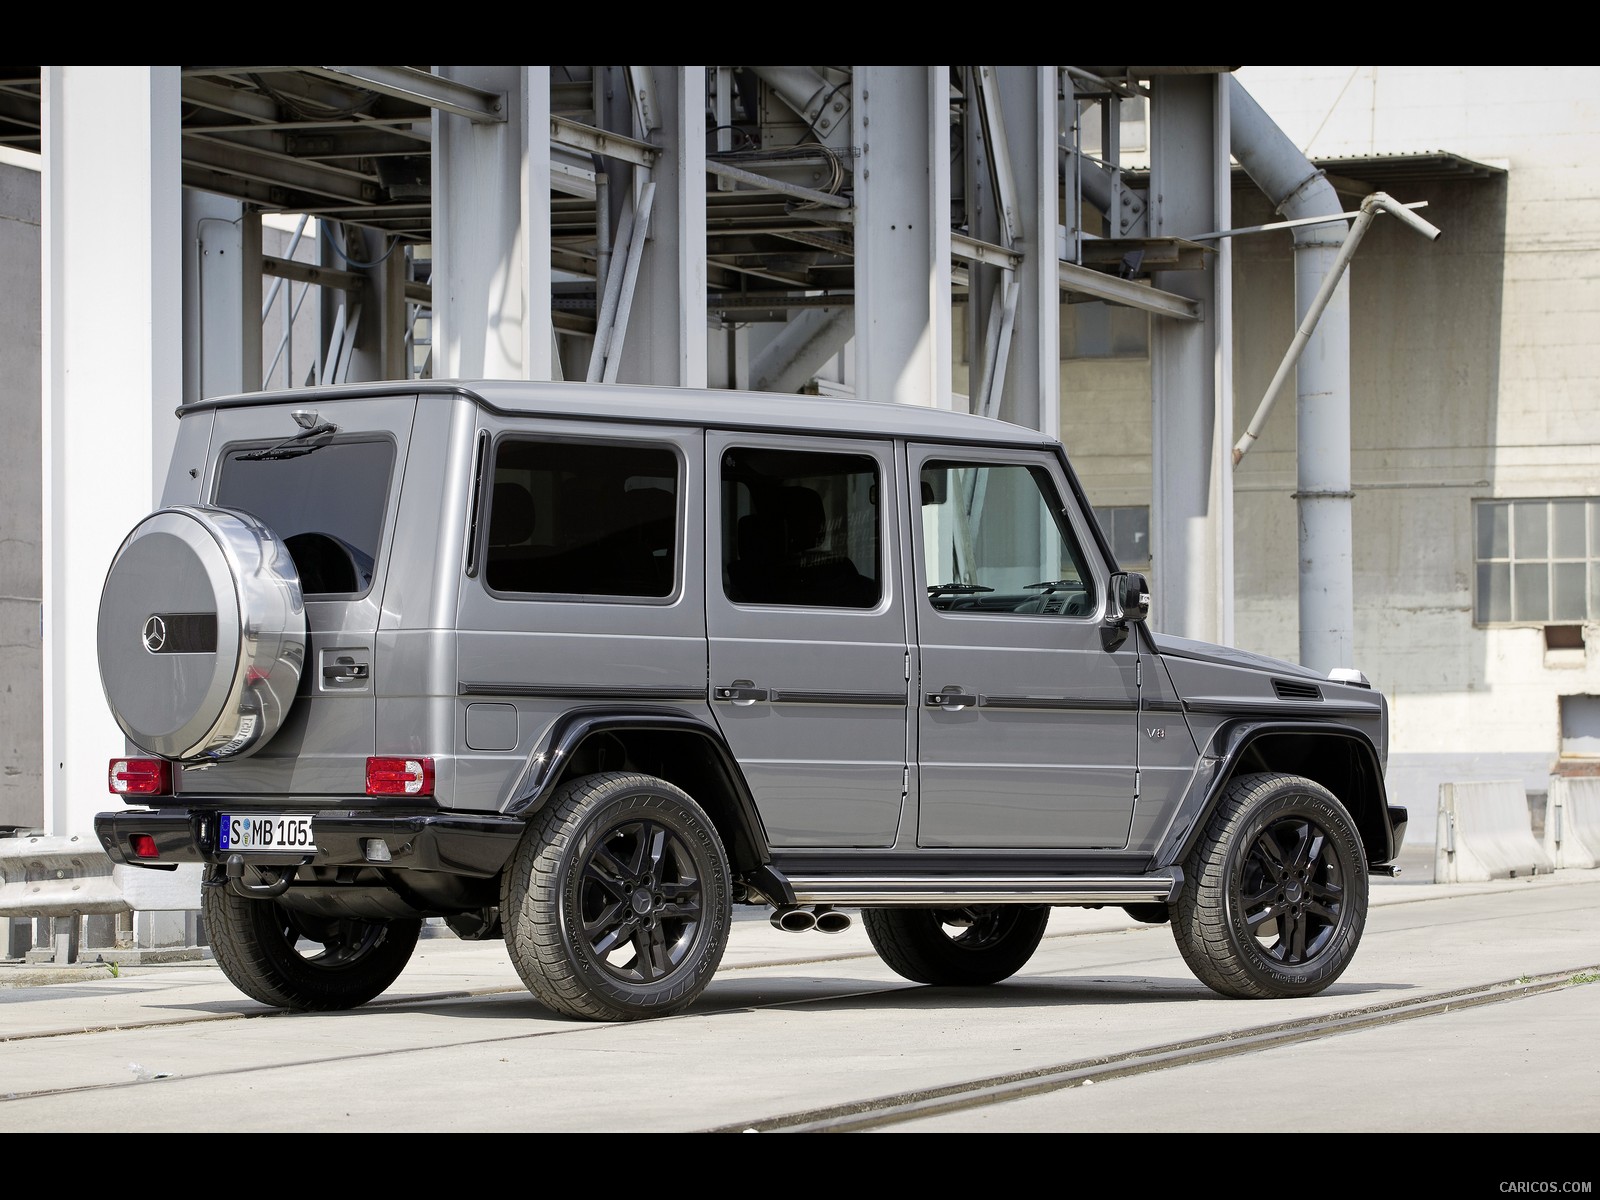 Mercedes-Benz G-Class "Edition Select" (2012)  - Side, #2 of 13